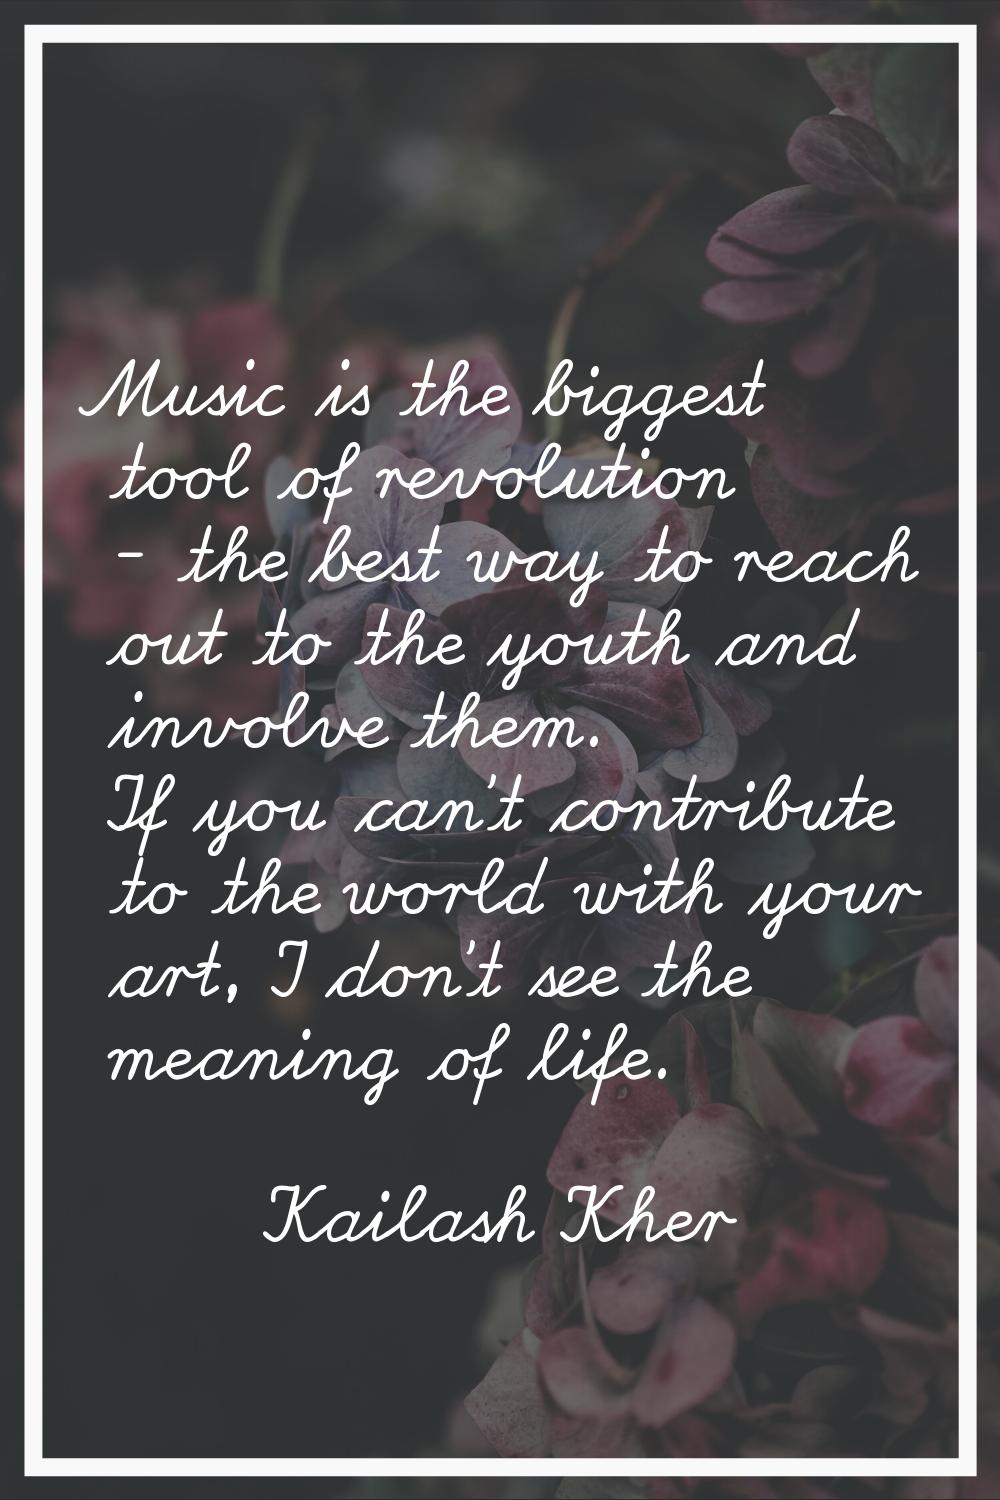 Music is the biggest tool of revolution - the best way to reach out to the youth and involve them. 